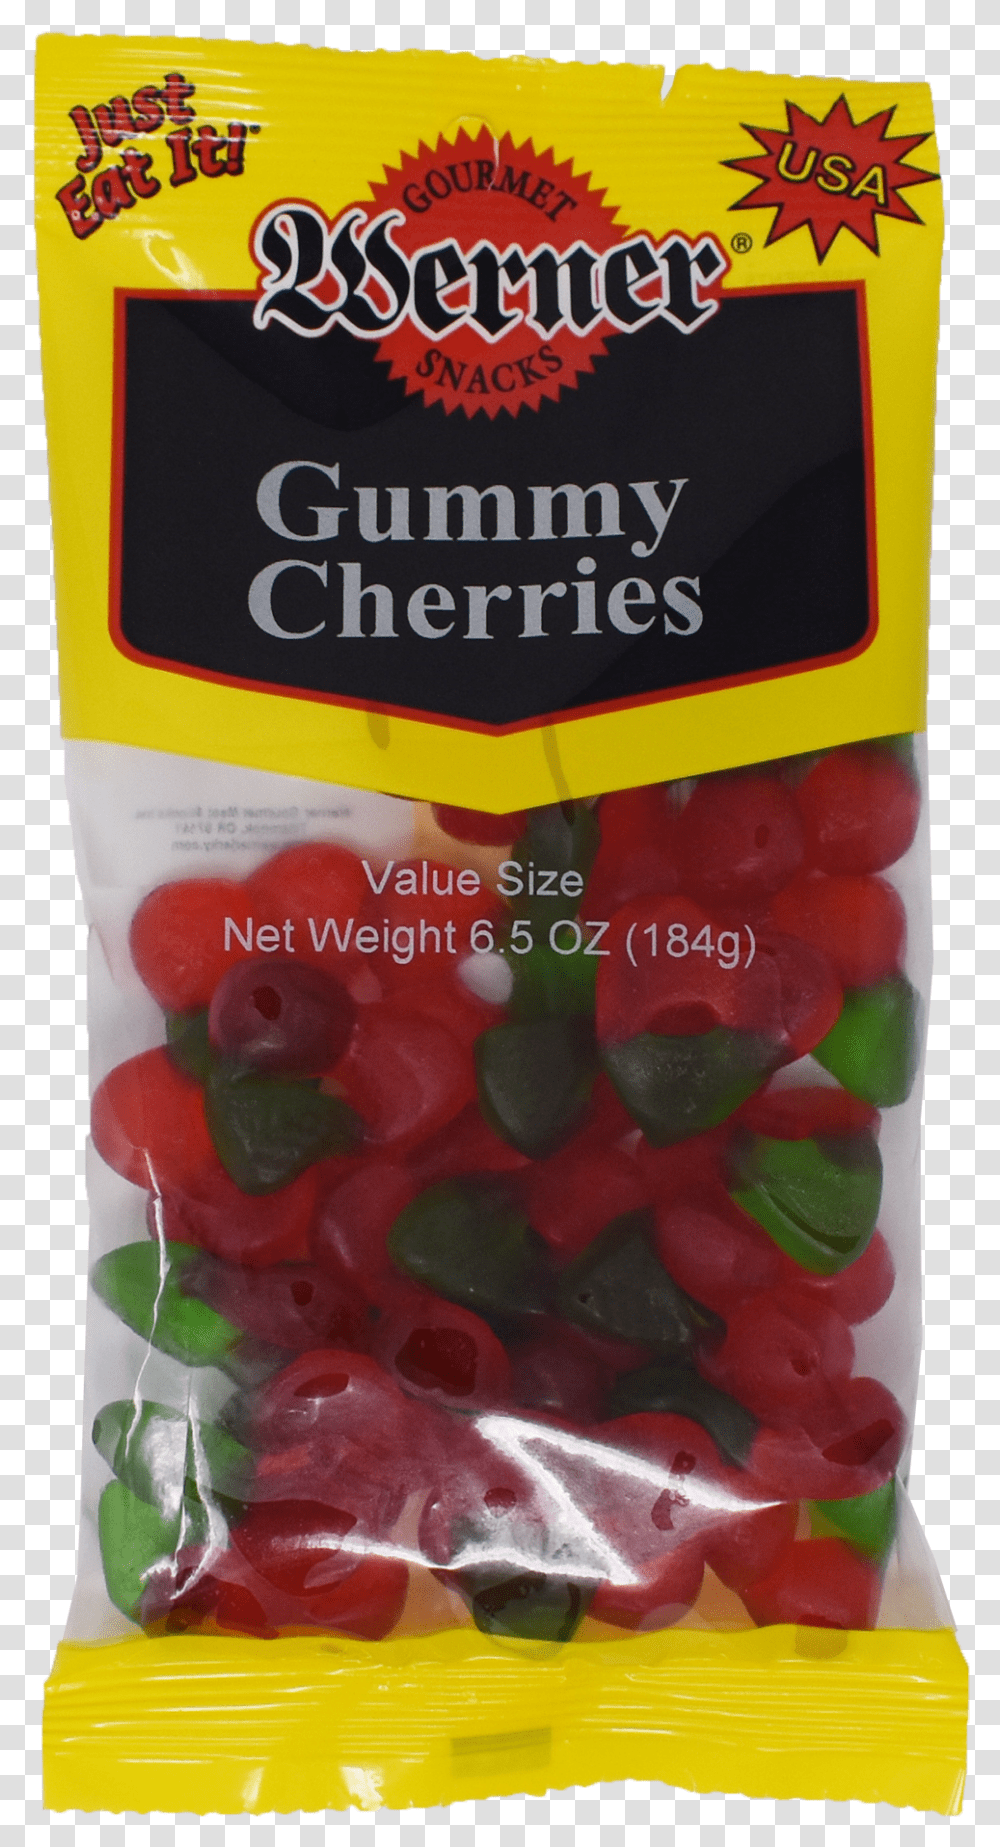 Gummy CherriesClass, Food, Candy, Jelly, Poster Transparent Png